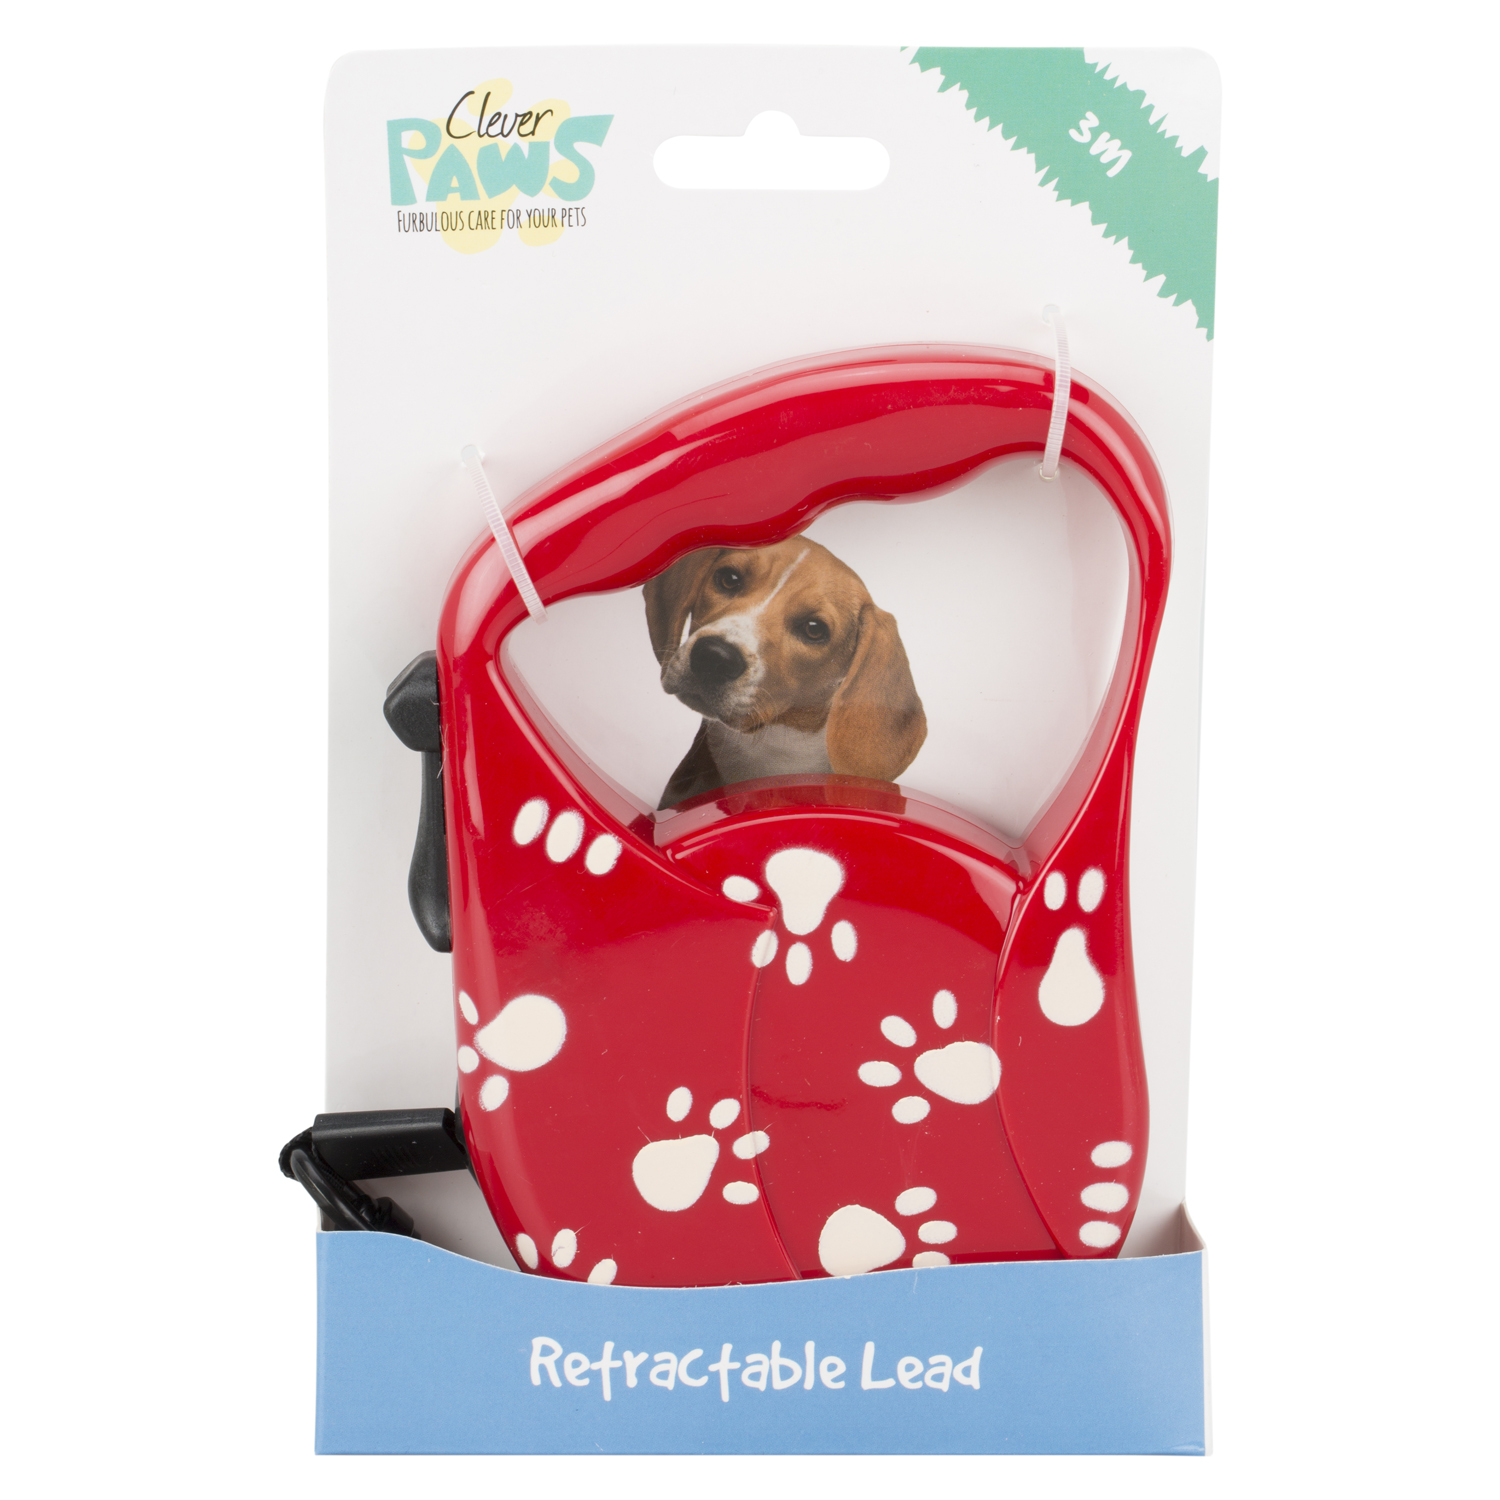 Clever Paws Paw Print Retractable Lead 3m Image 1